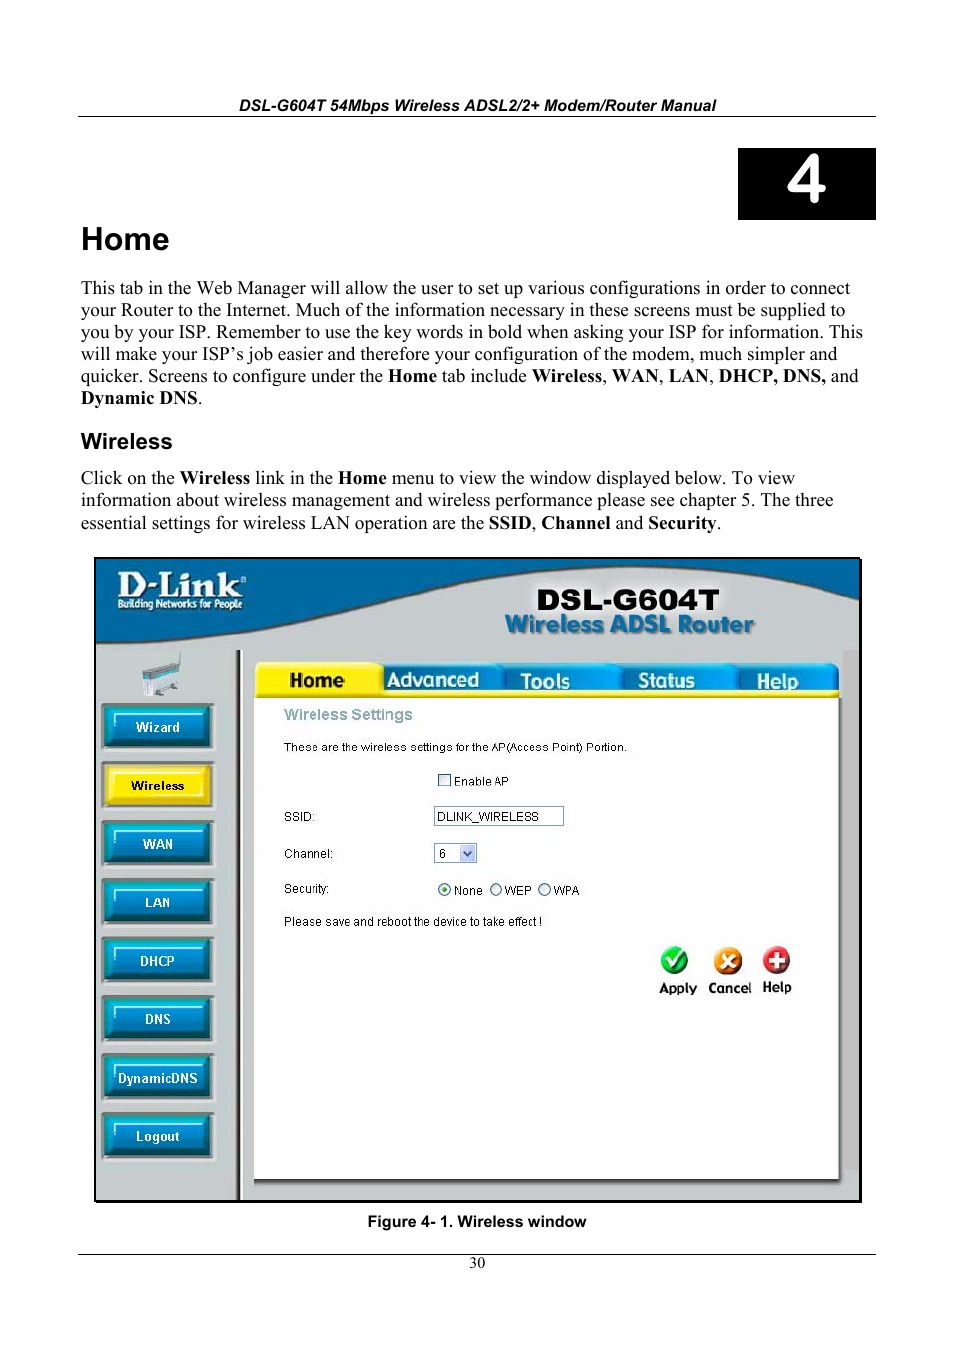 Home | D-Link WIRELESSADSLROUTER DSL-G604T User Manual | Page 30 / 92